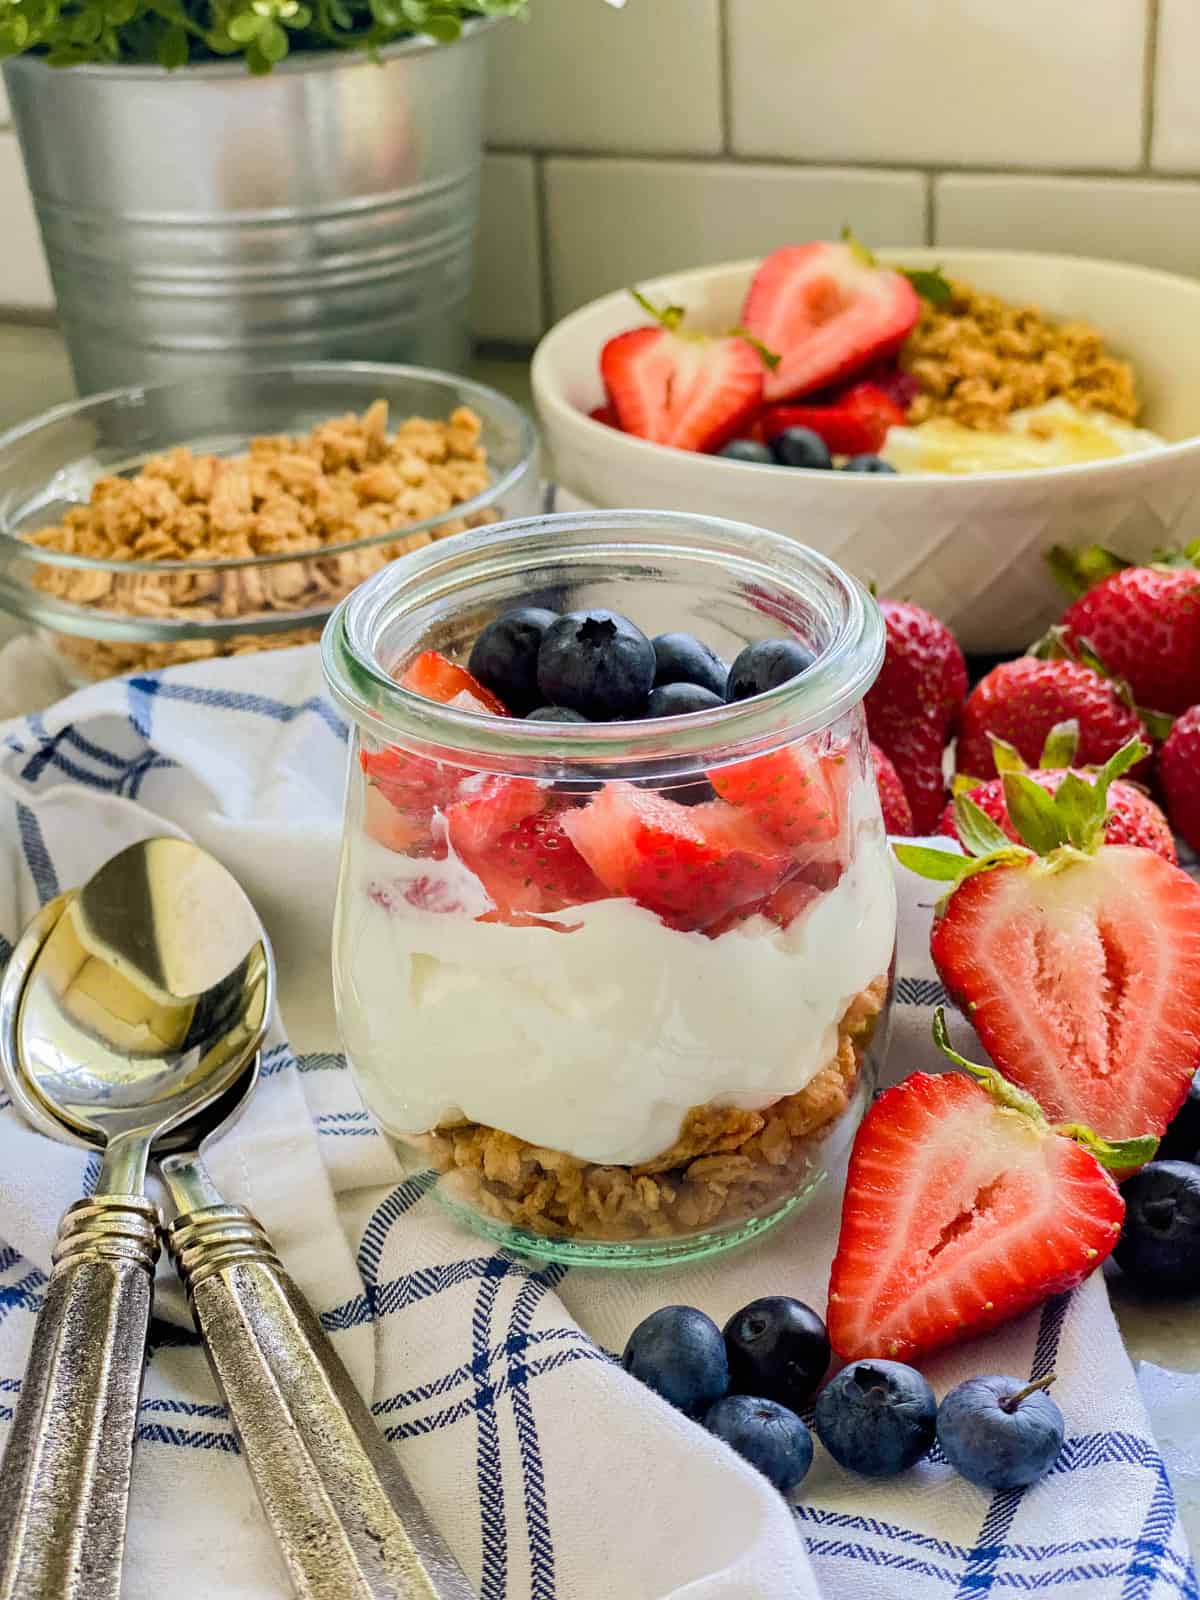 Glass jar filled with granola, yogurt, and fruit with spoons next to it.